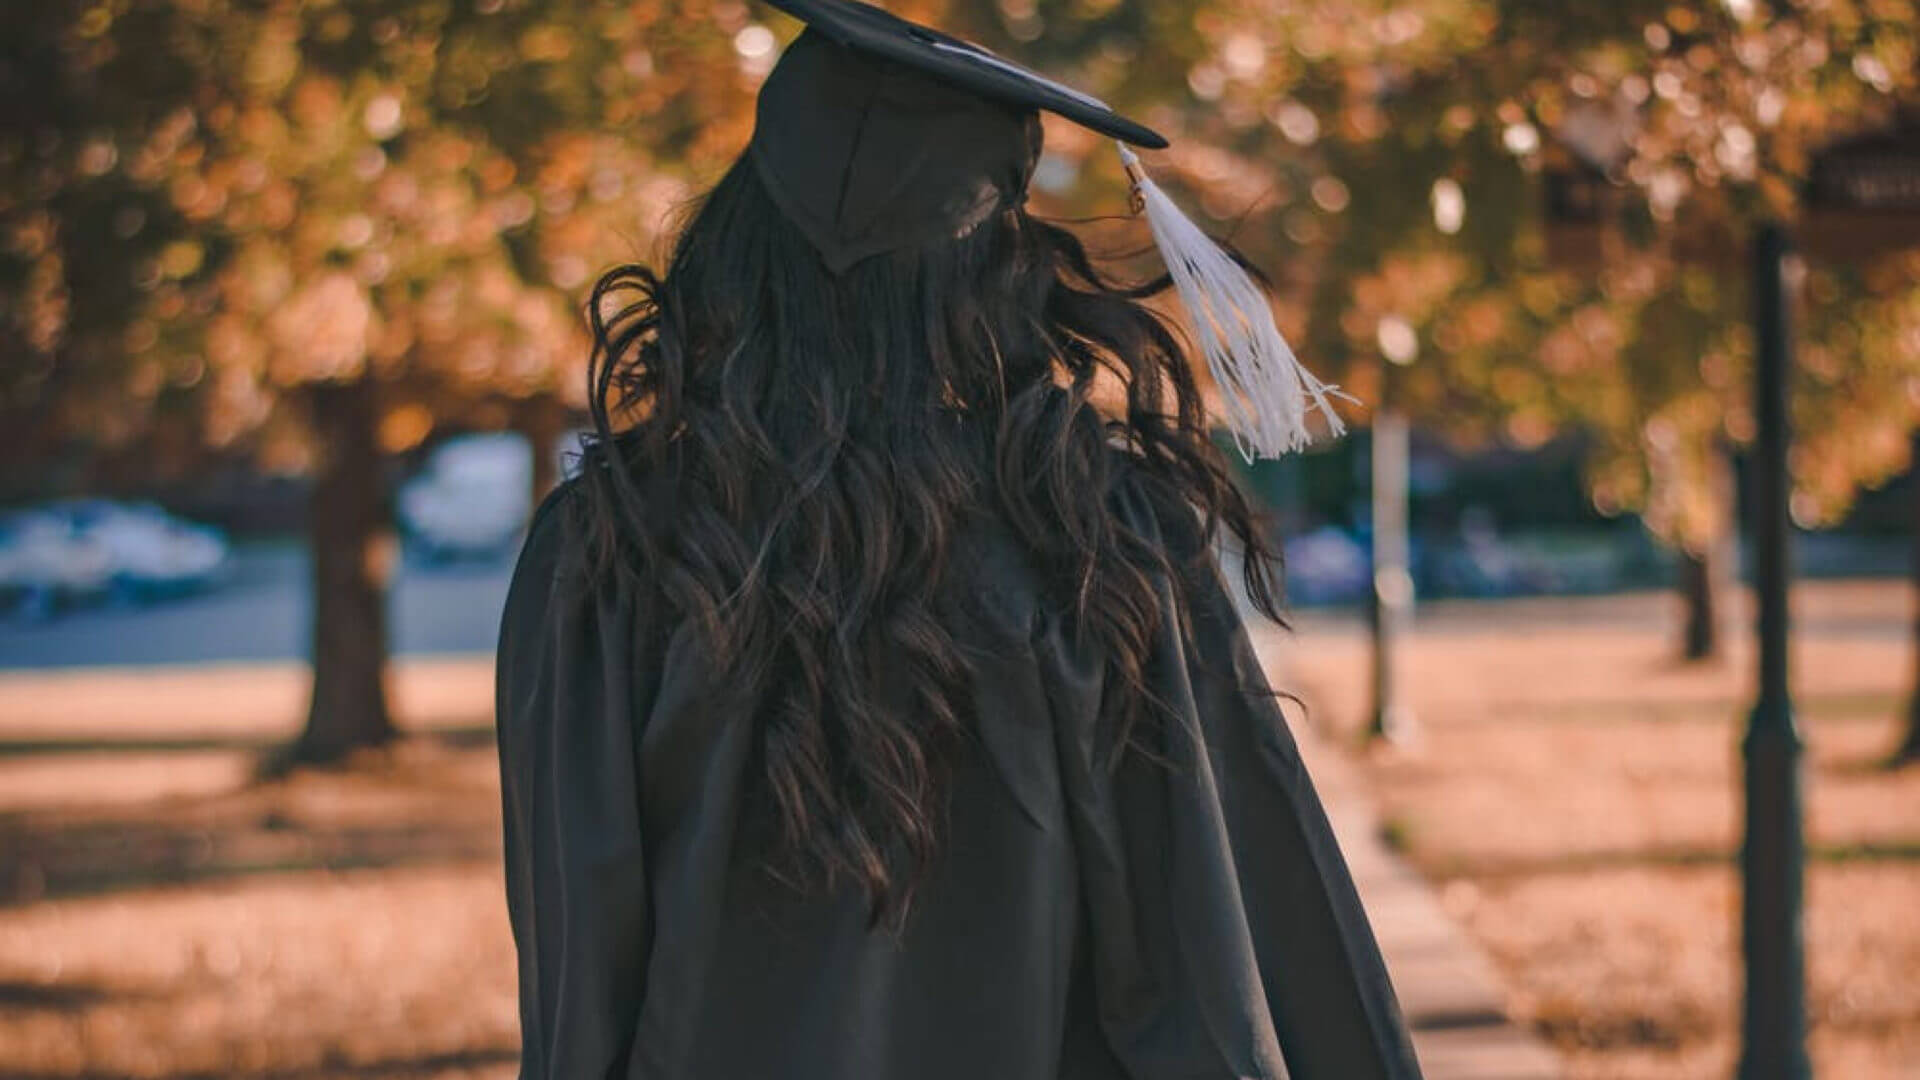 Tips To Put On Your Graduation Regalia the Right Way